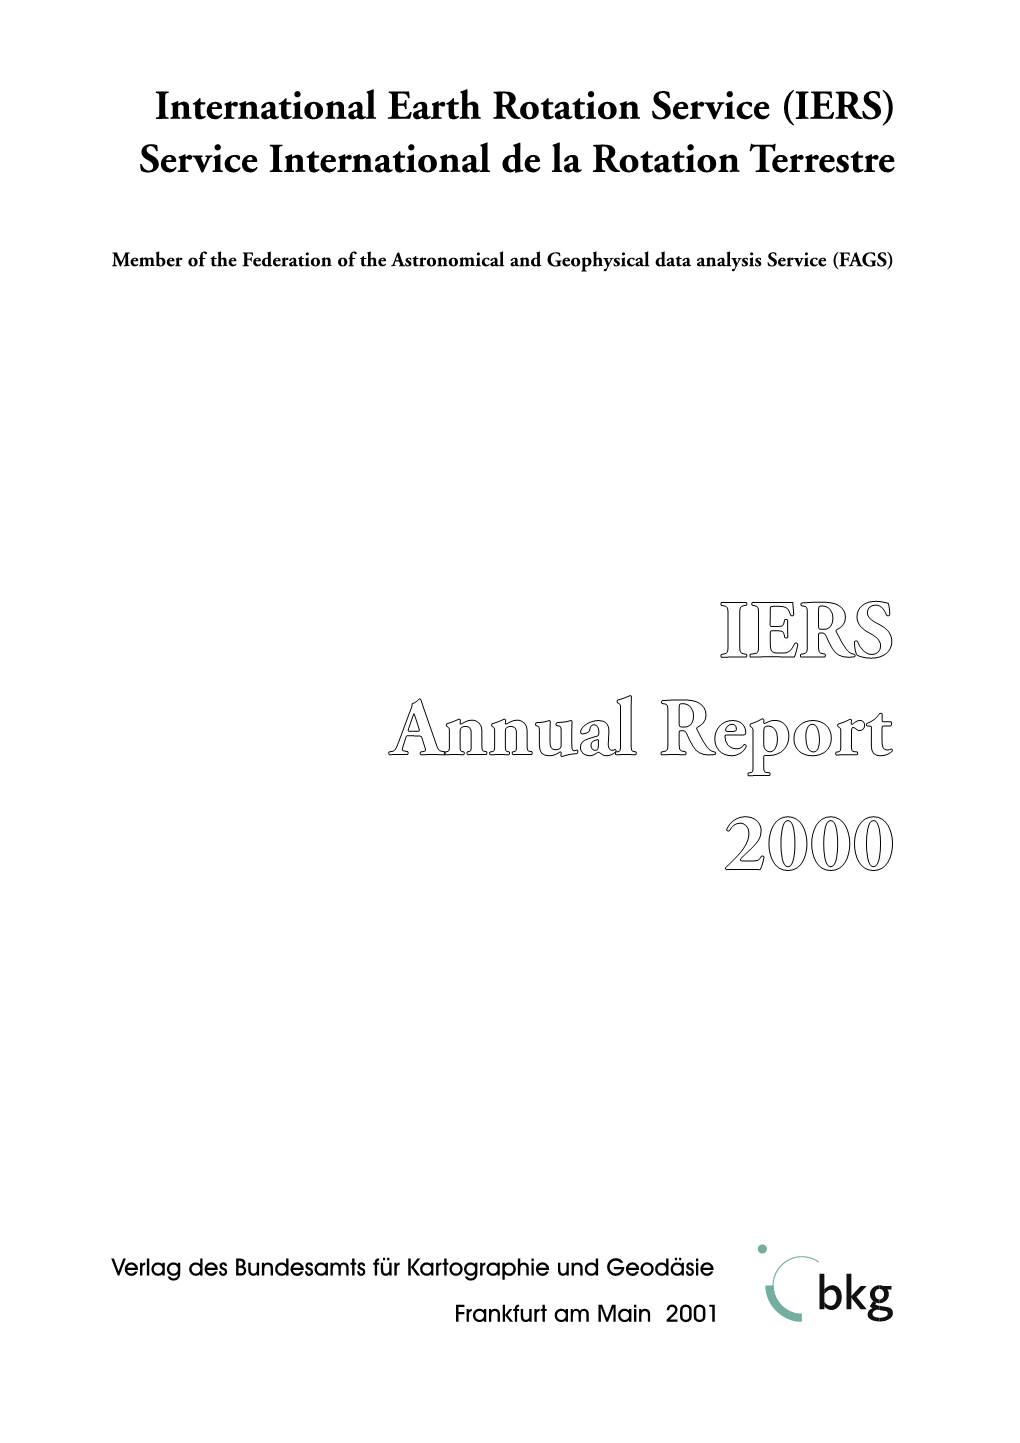 IERS Annual Report 2000